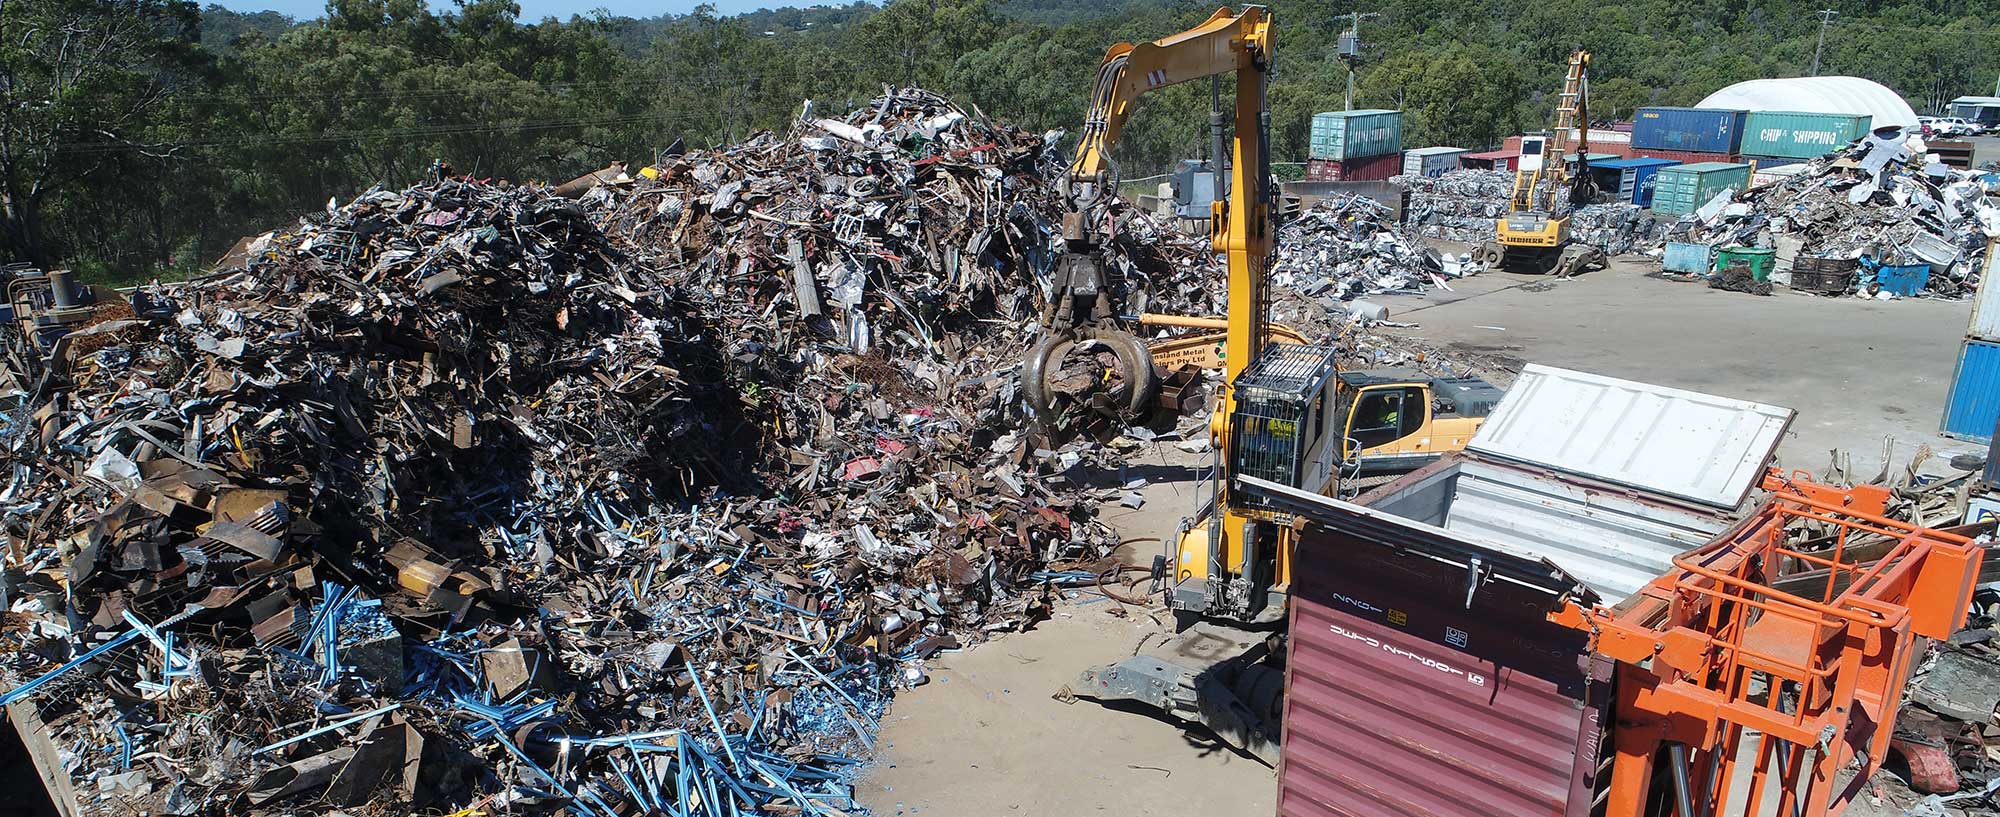 The value of metal and how it is recycled